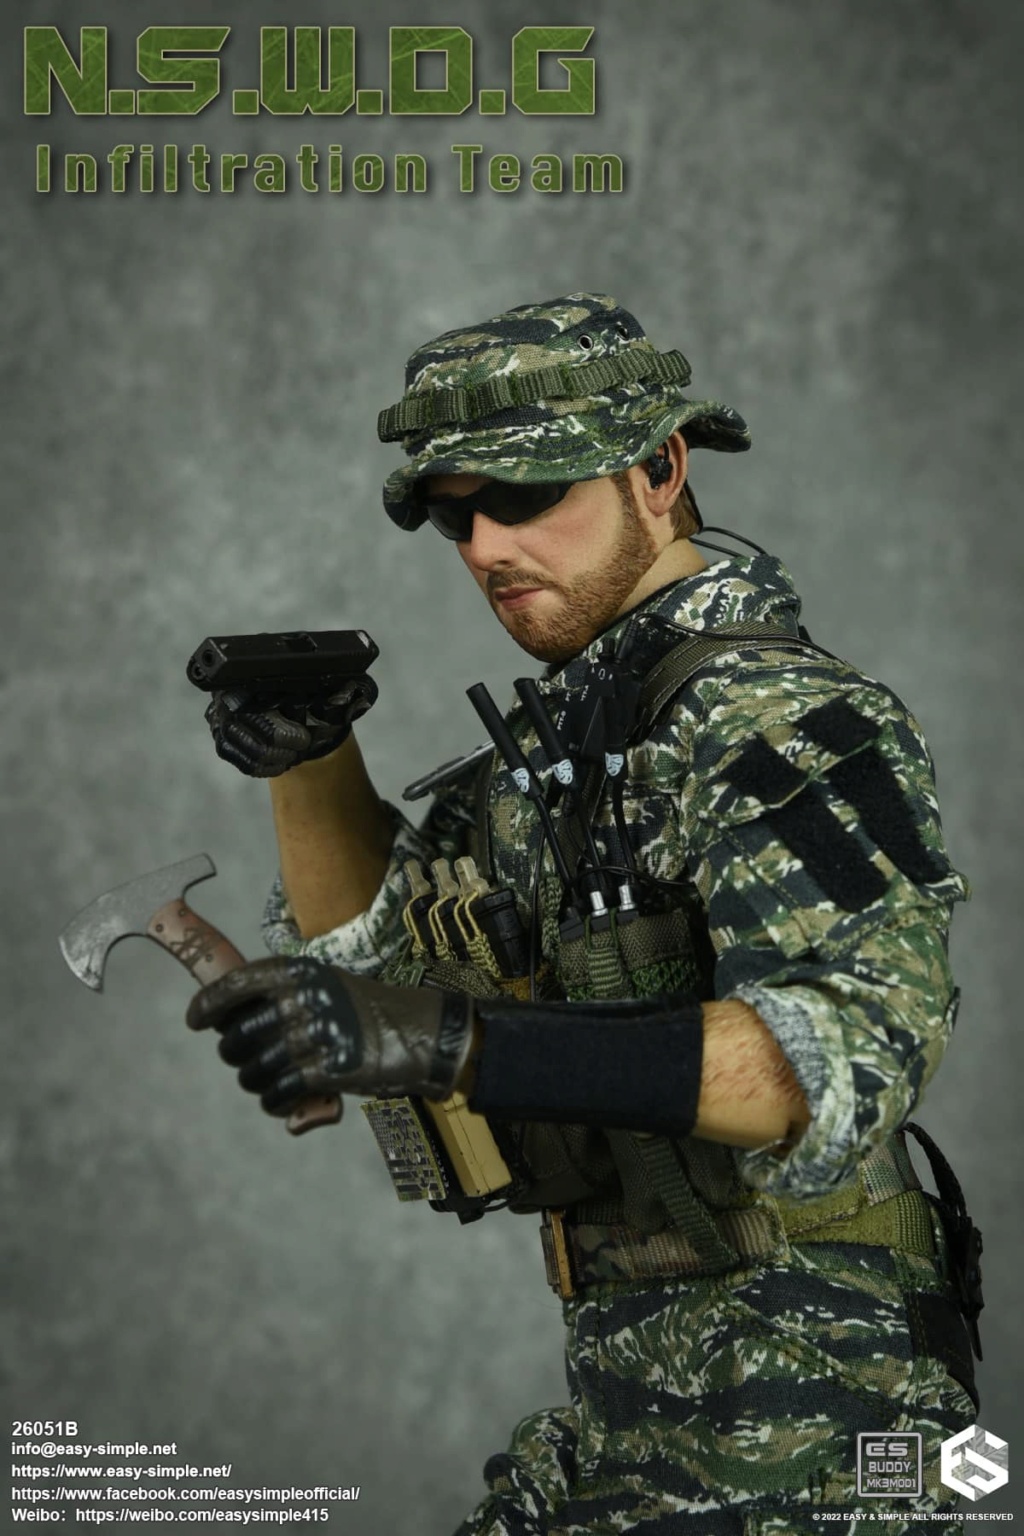 easy - NEW PRODUCT: EASY AND SIMPLE 1/6 SCALE FIGURE: N.S.W.D.G INFILTRATION TEAM - (2 Versions) 11857